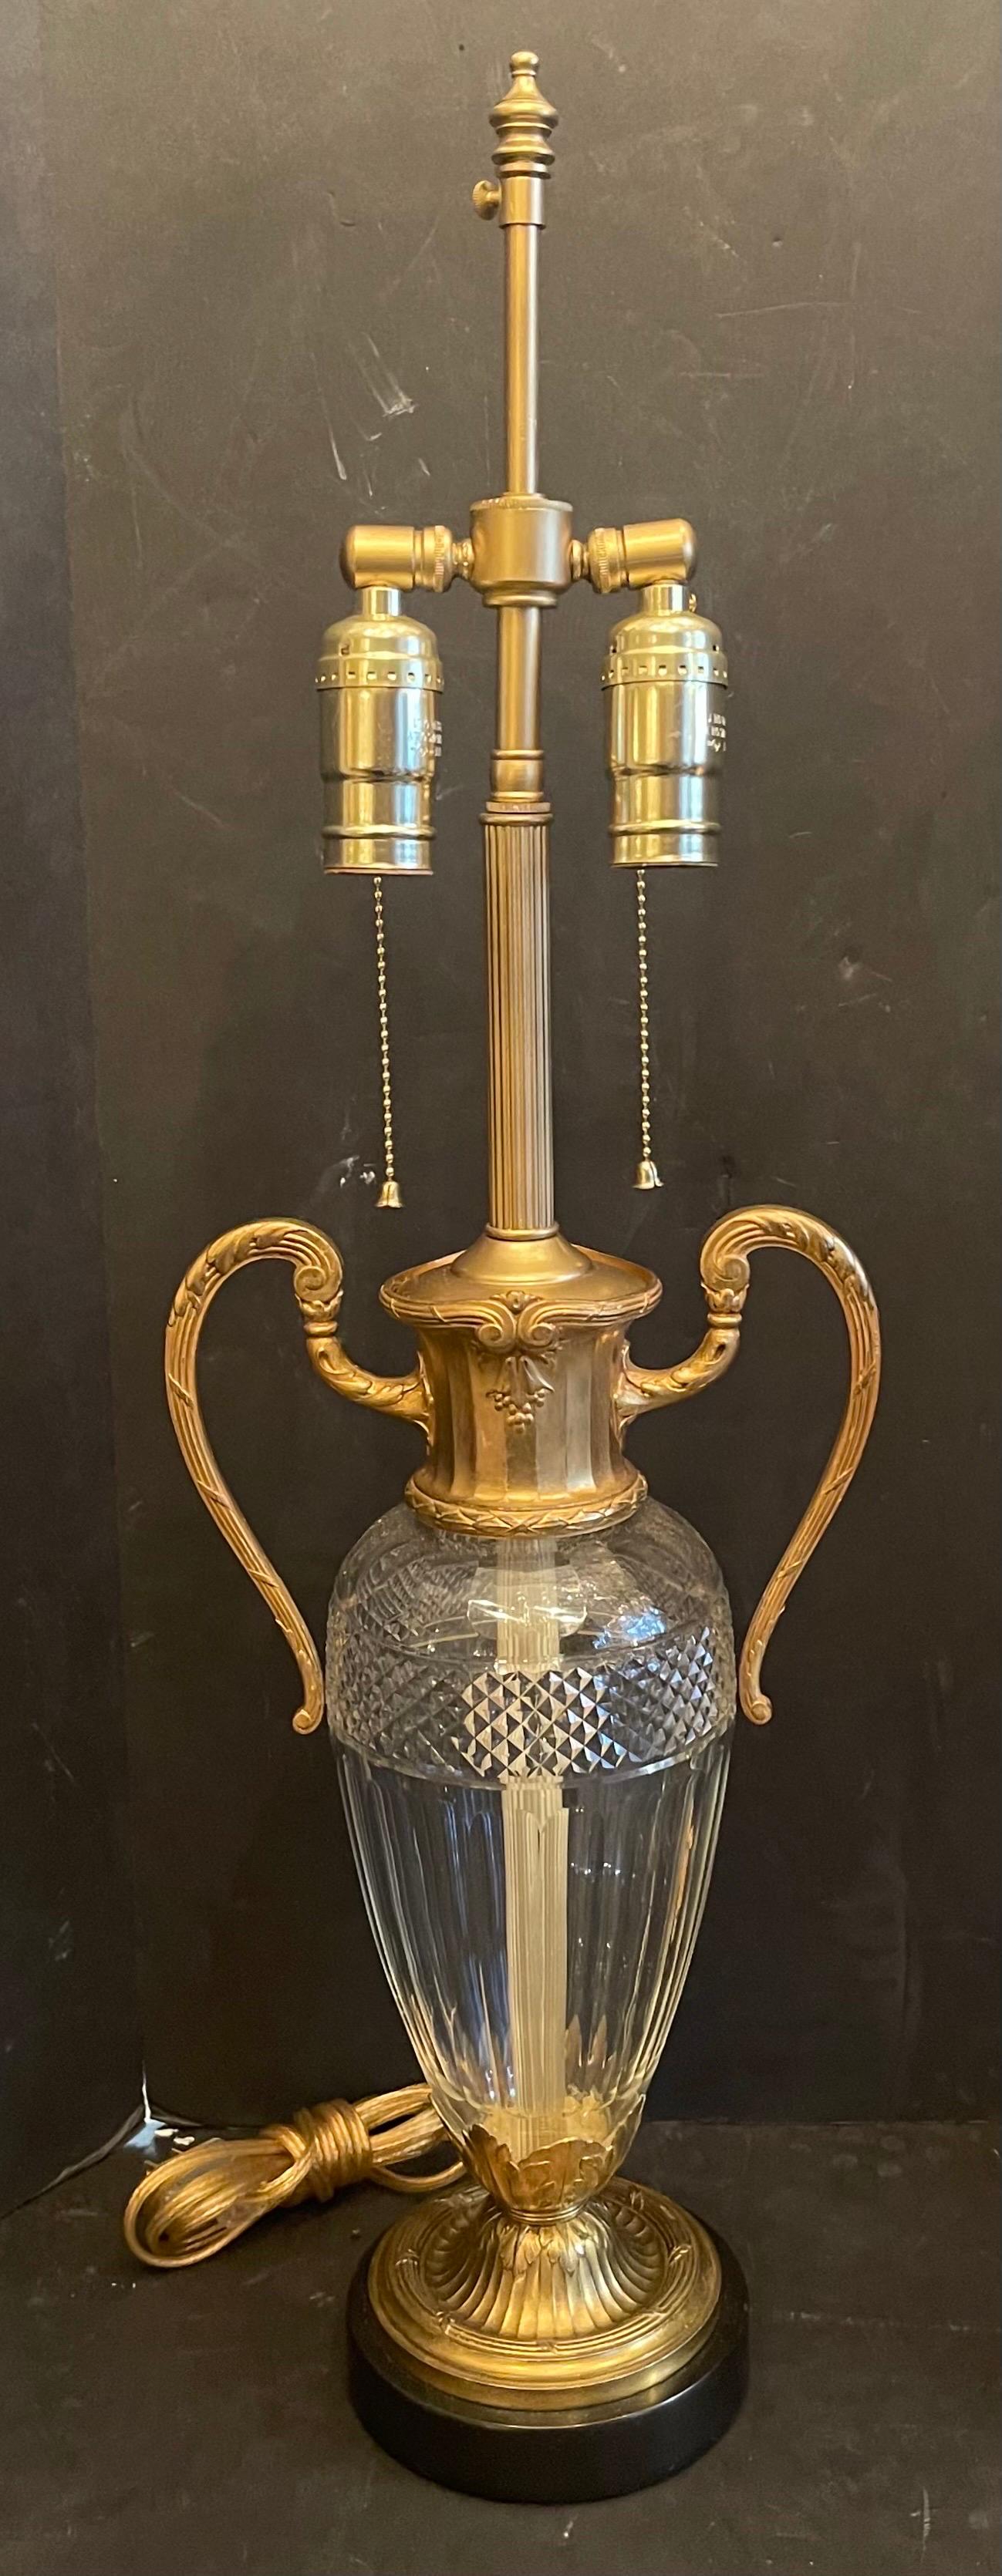 Faceted Wonderful Pair French Gilt Dore Bronze Cut Crystal Urn Form Ormolu-Mounted Lamps For Sale